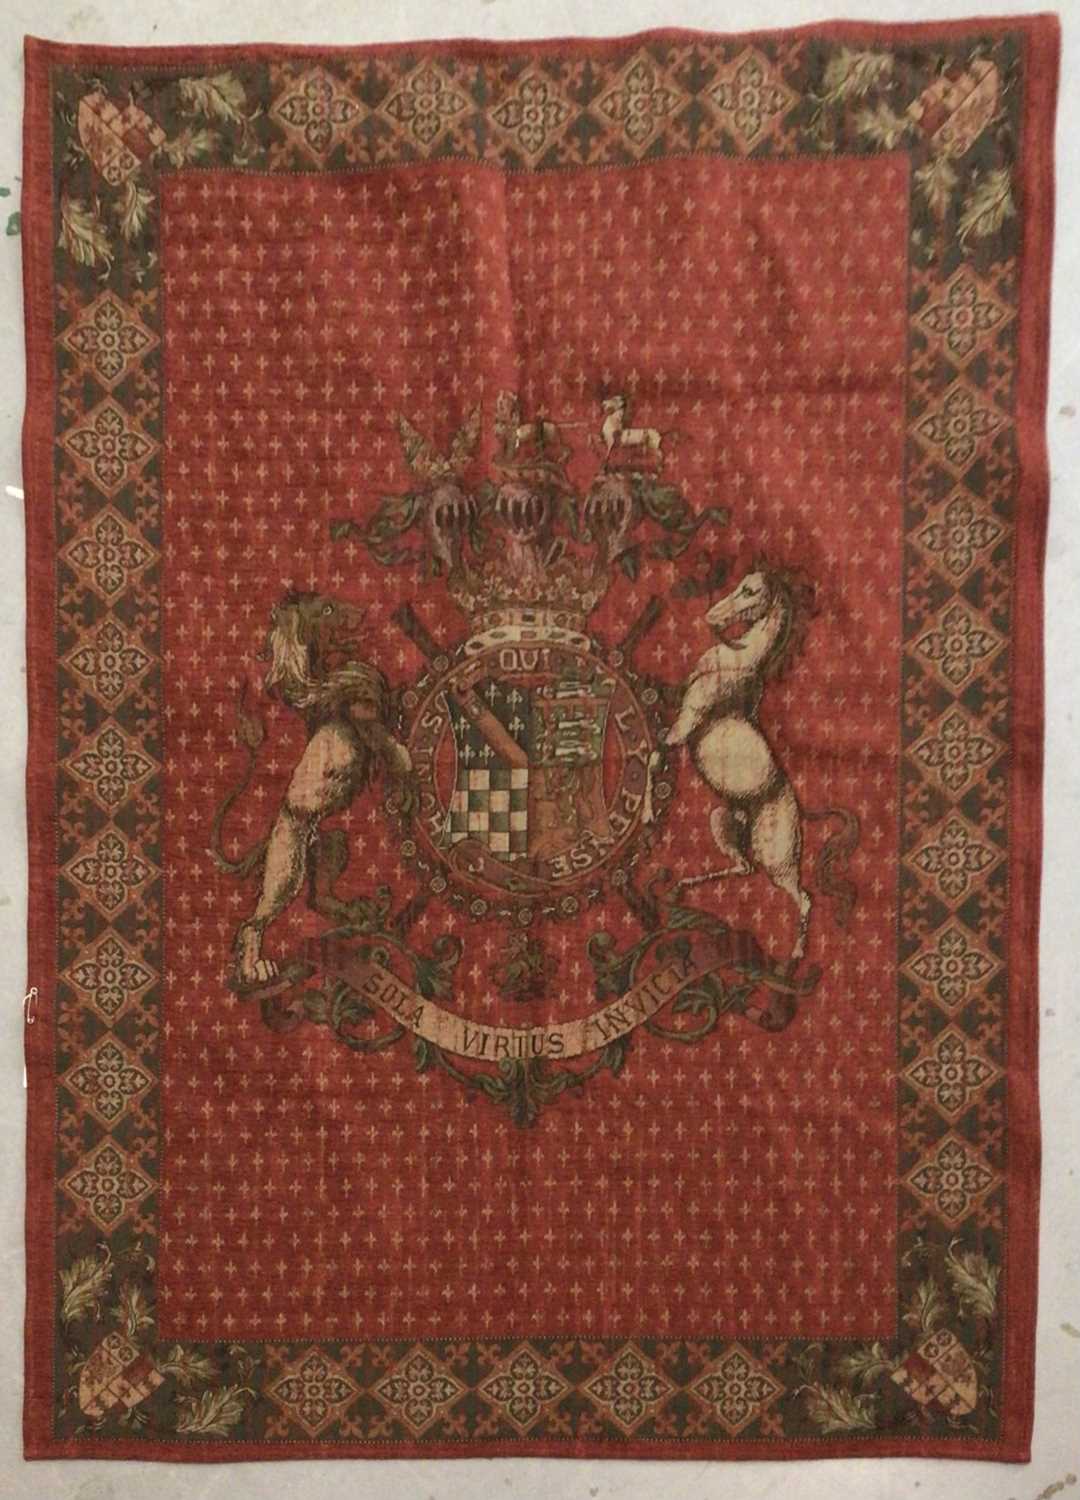 Lot 112 - Decorative armorial tapestry wall hanging with the Duke of Norfolk arms.